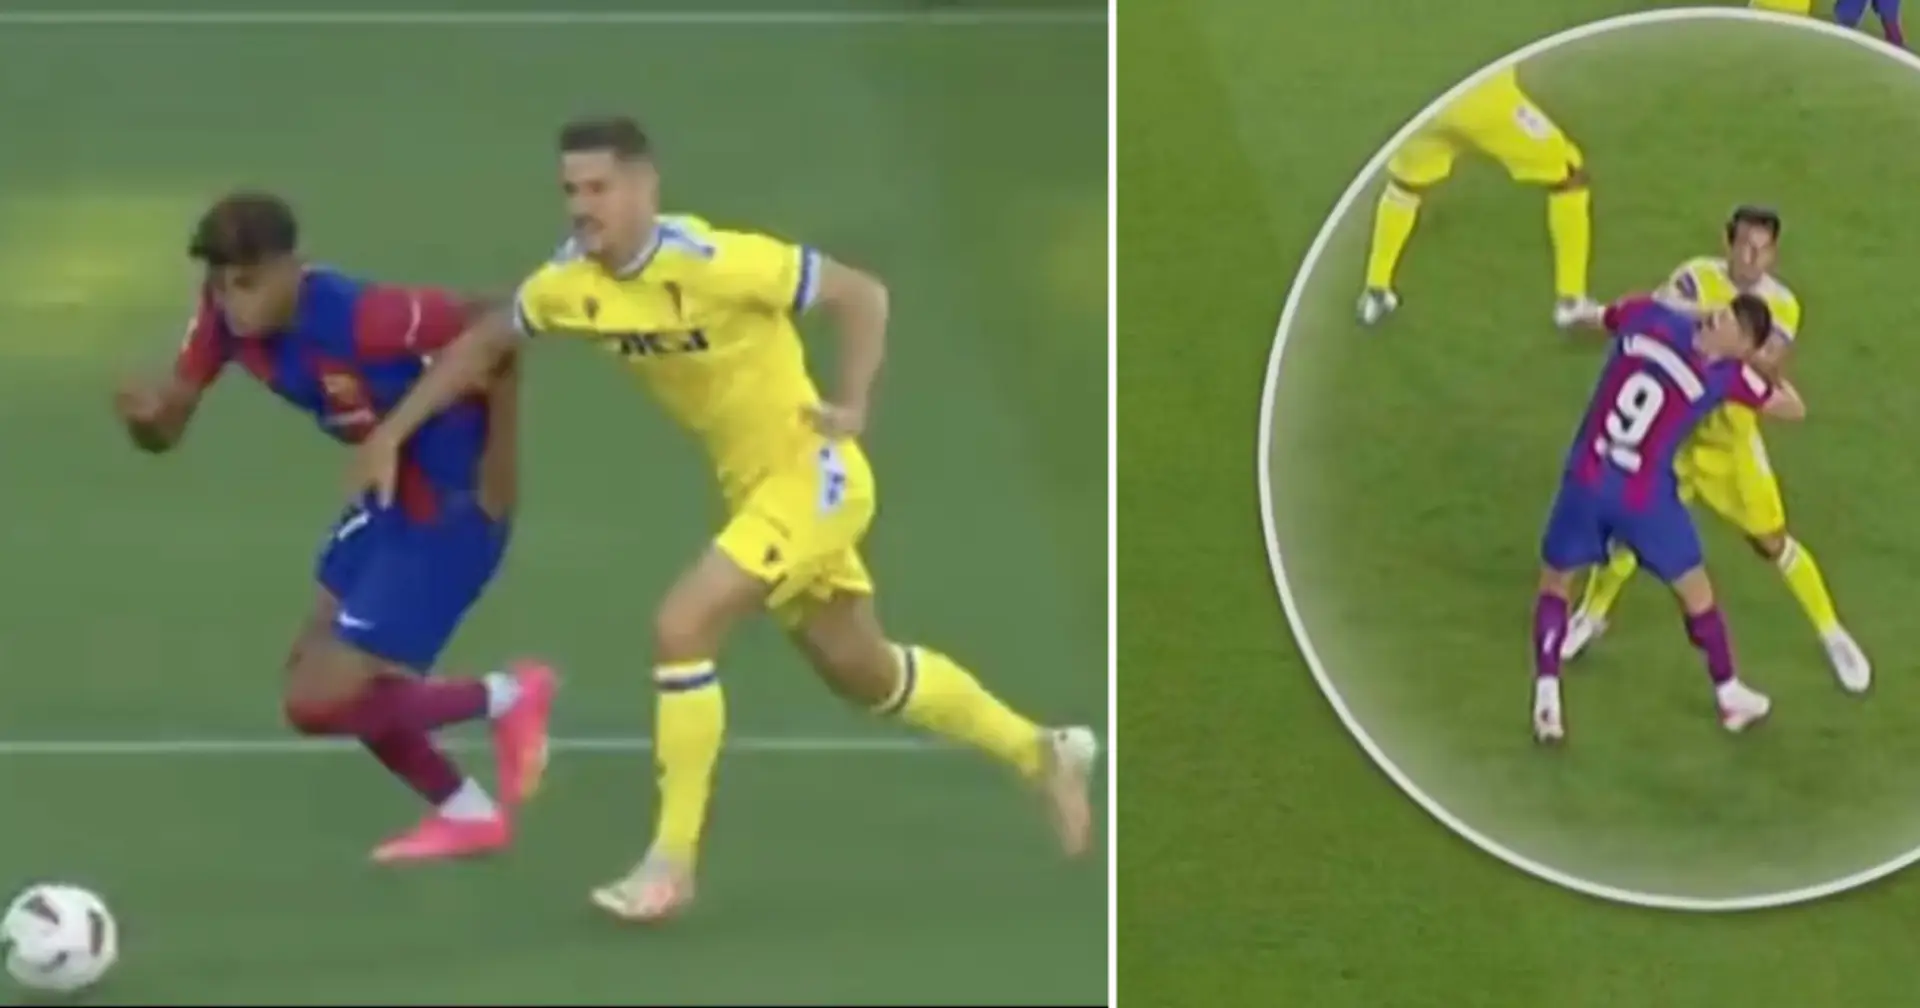 Spotted: 2 controversial episodes in Cadiz clash that saw Barca 'robbed' of penalties